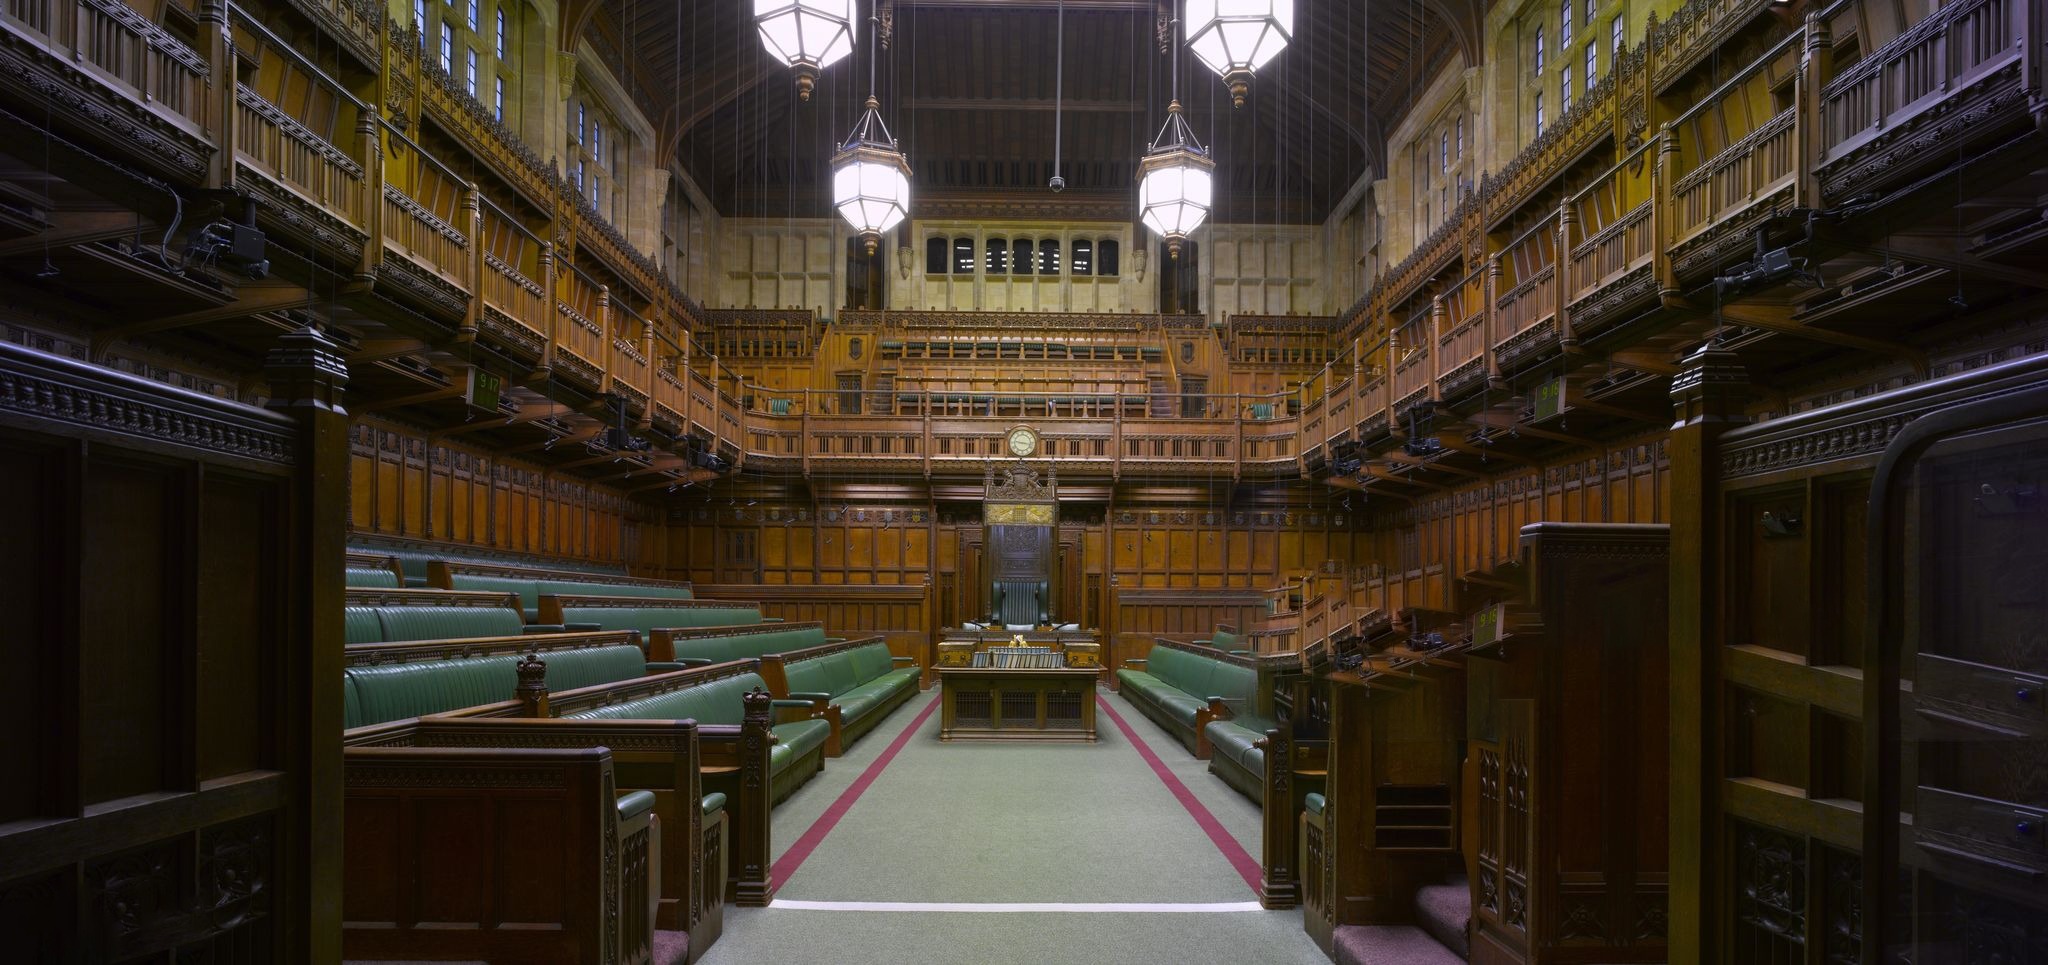 visit house of commons